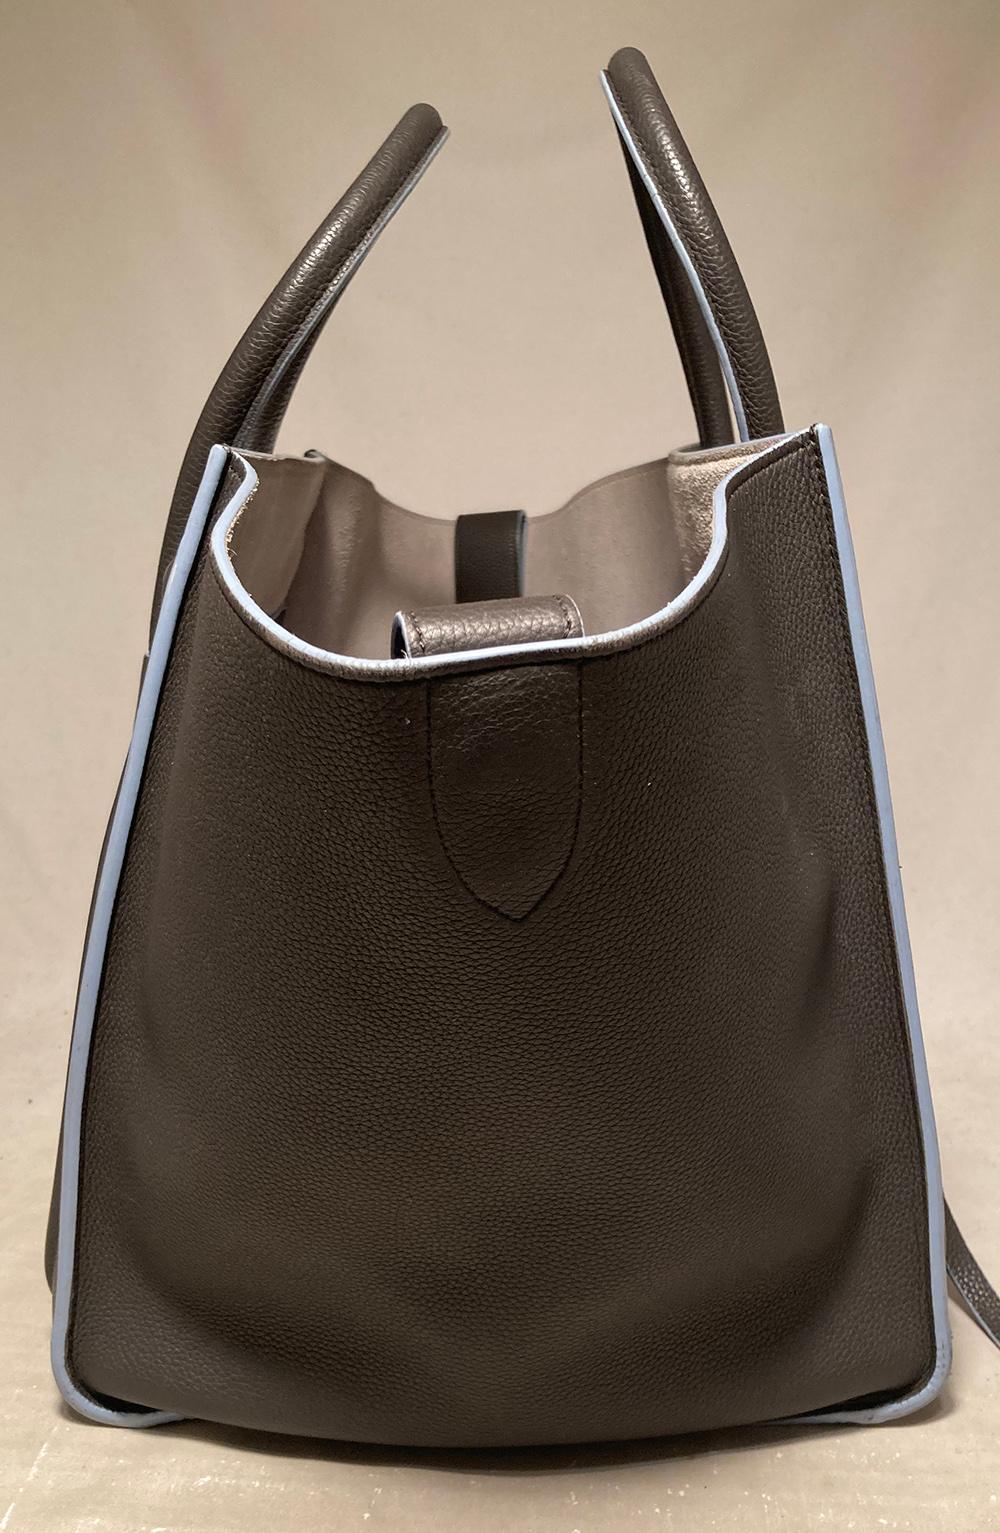 Celine Medium Grey Leather Phantom Luggage Tote in very good condition. Grey grained leather exterior with blue piped edges and front side zippered pocket. Double top rolled handles and expandable side wings that can be pushed out for the classic